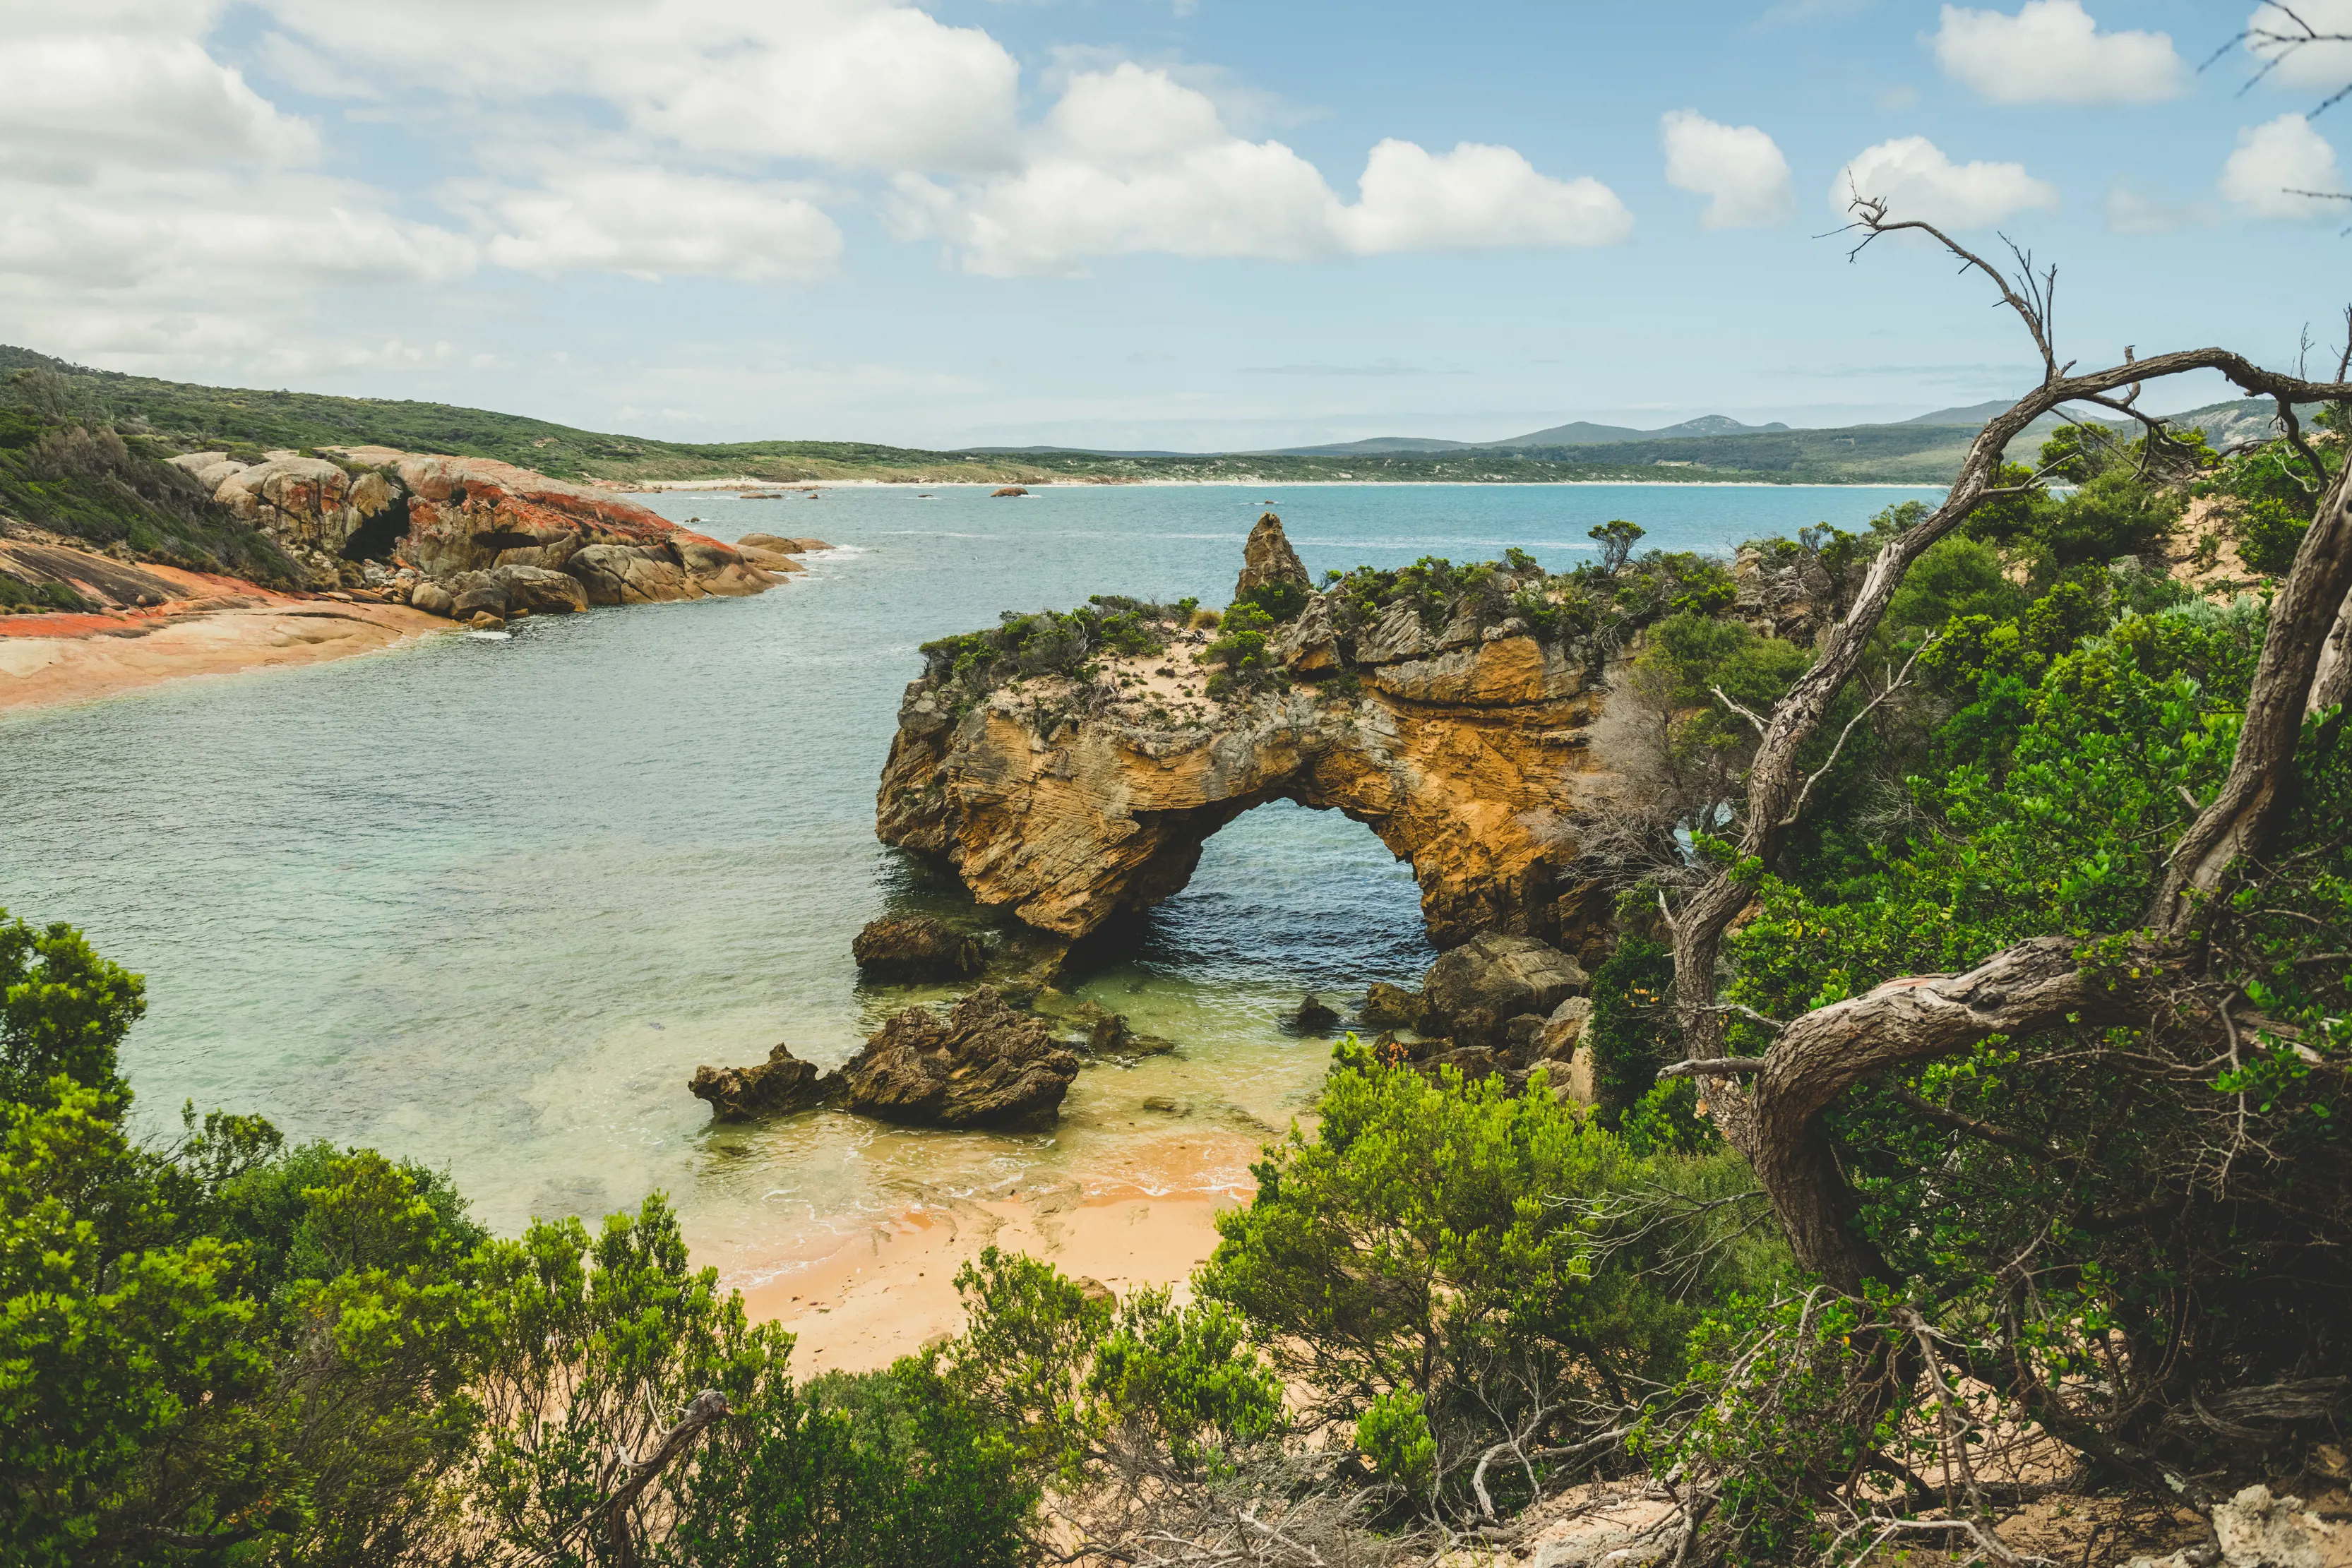 Stunning landscape image of Stacky's Bight, Flinders Island. Lush bushland meets the coastline with a large rock cave in the centre.